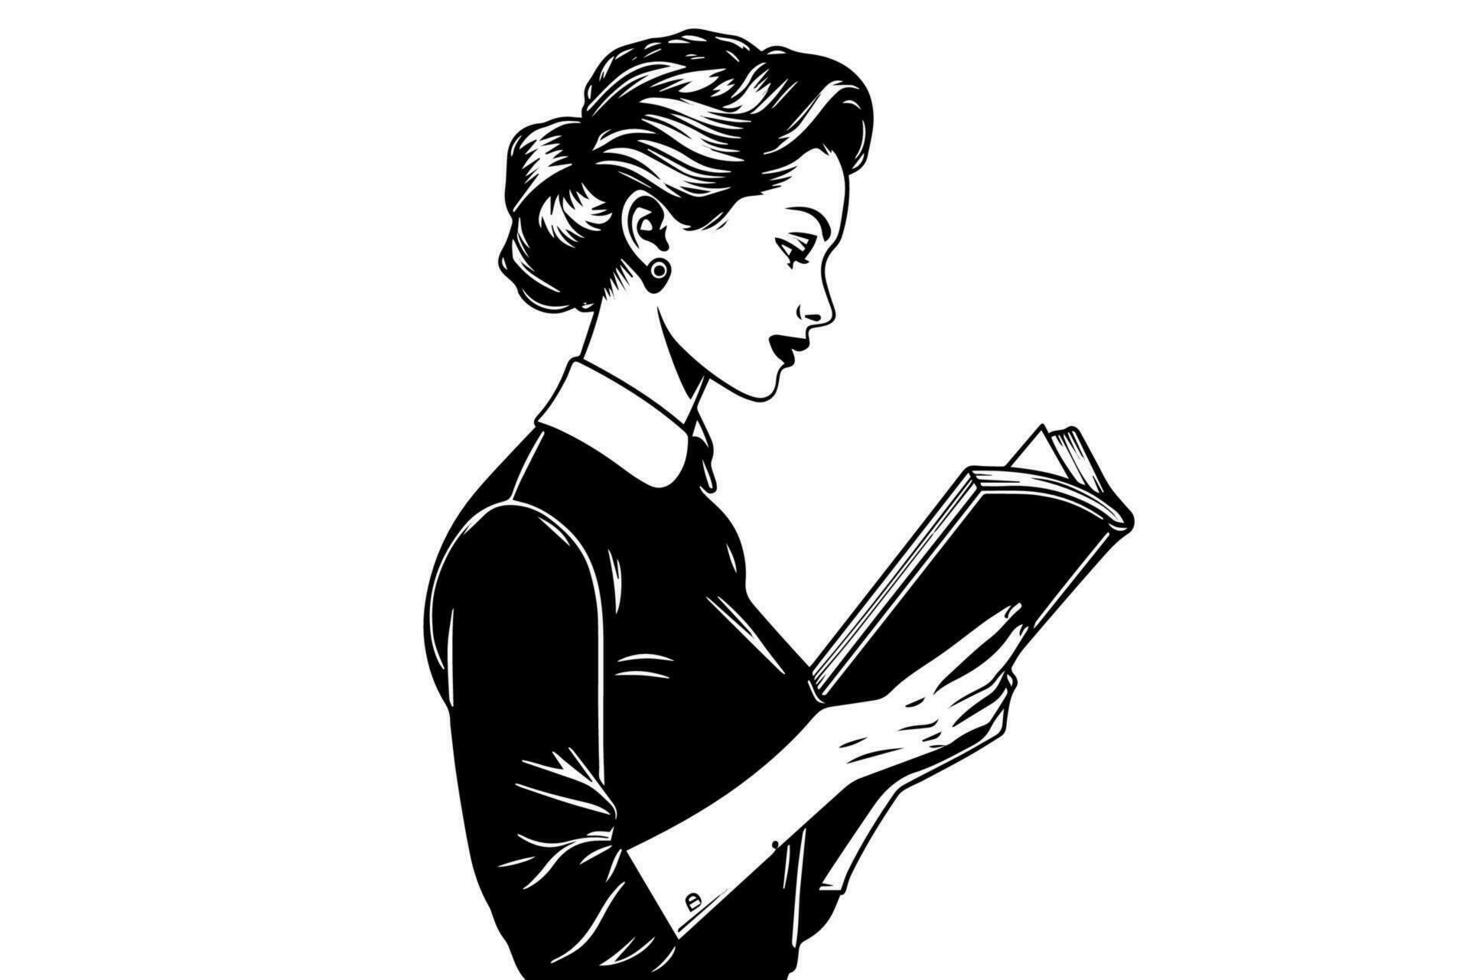 Businness woman read book ink drawing sketch. Pop art style black and white vector illustration.